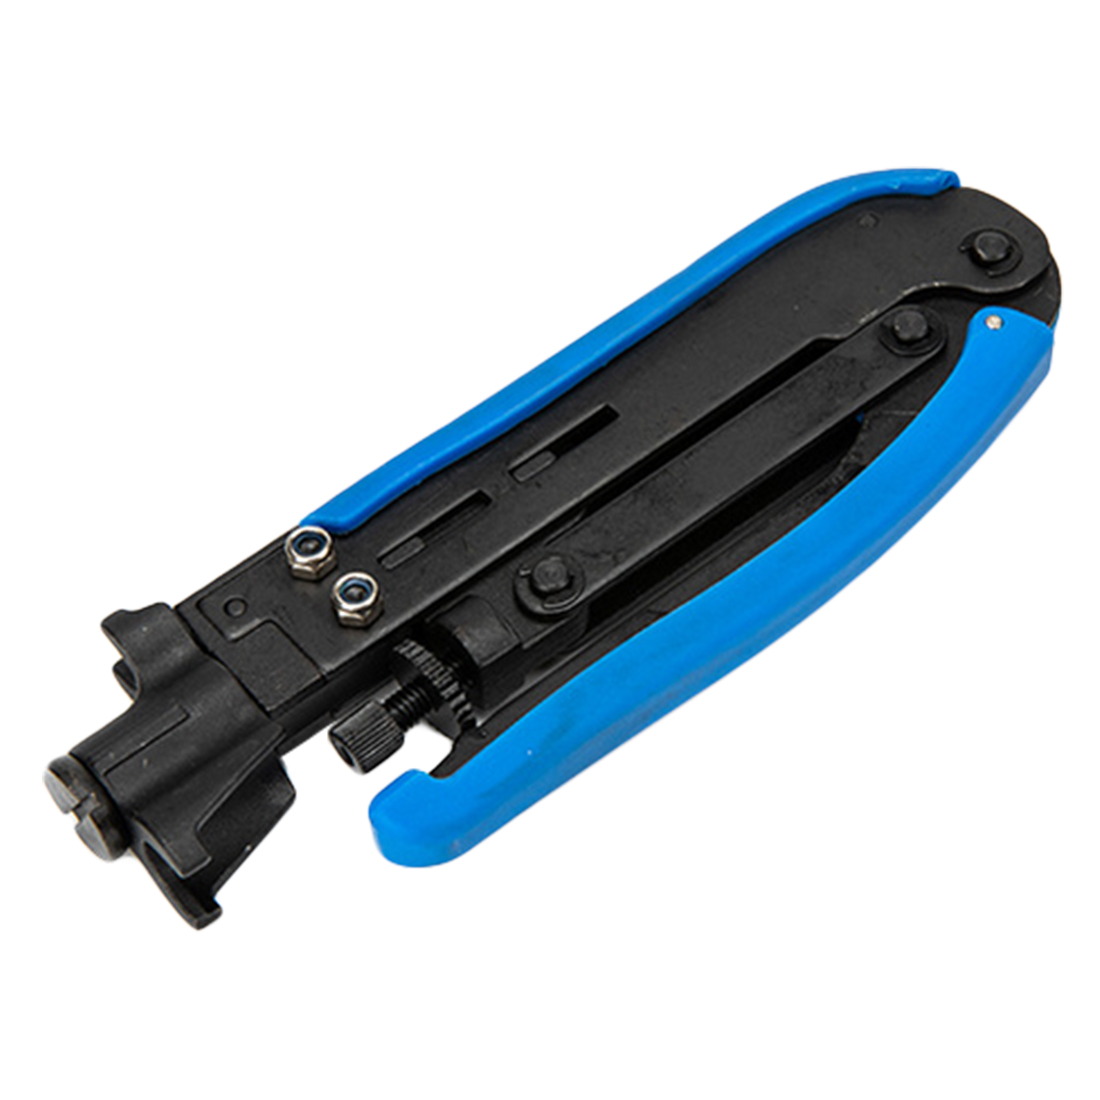 Compression Wire Crimper Plier Crimping Tool RG6 RG59 RG11 Coaxial Cable Crimper Tool For F Connector